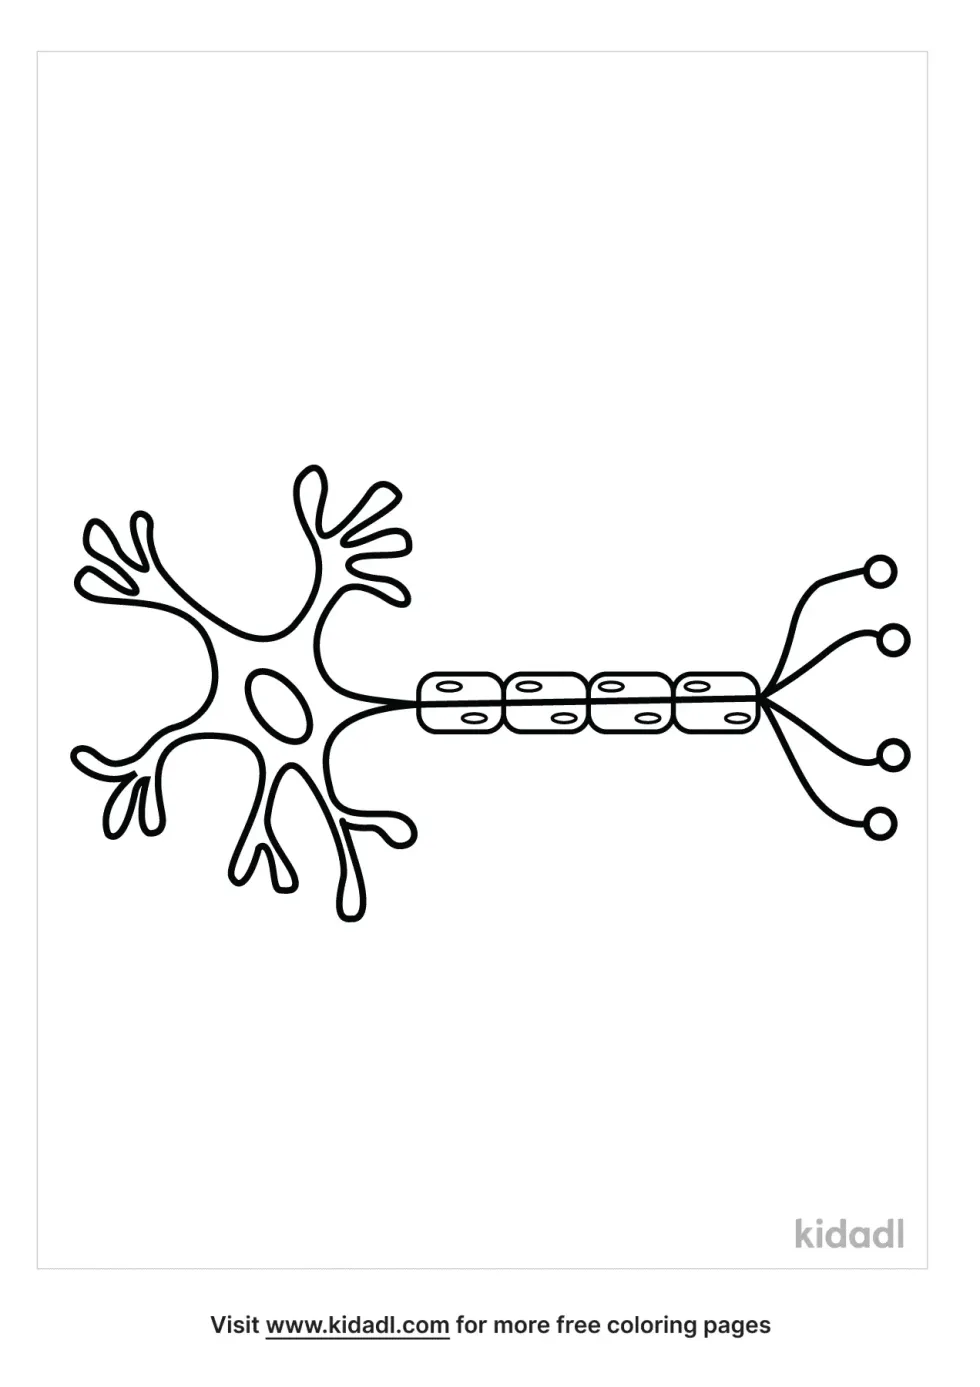 Nerve Cell